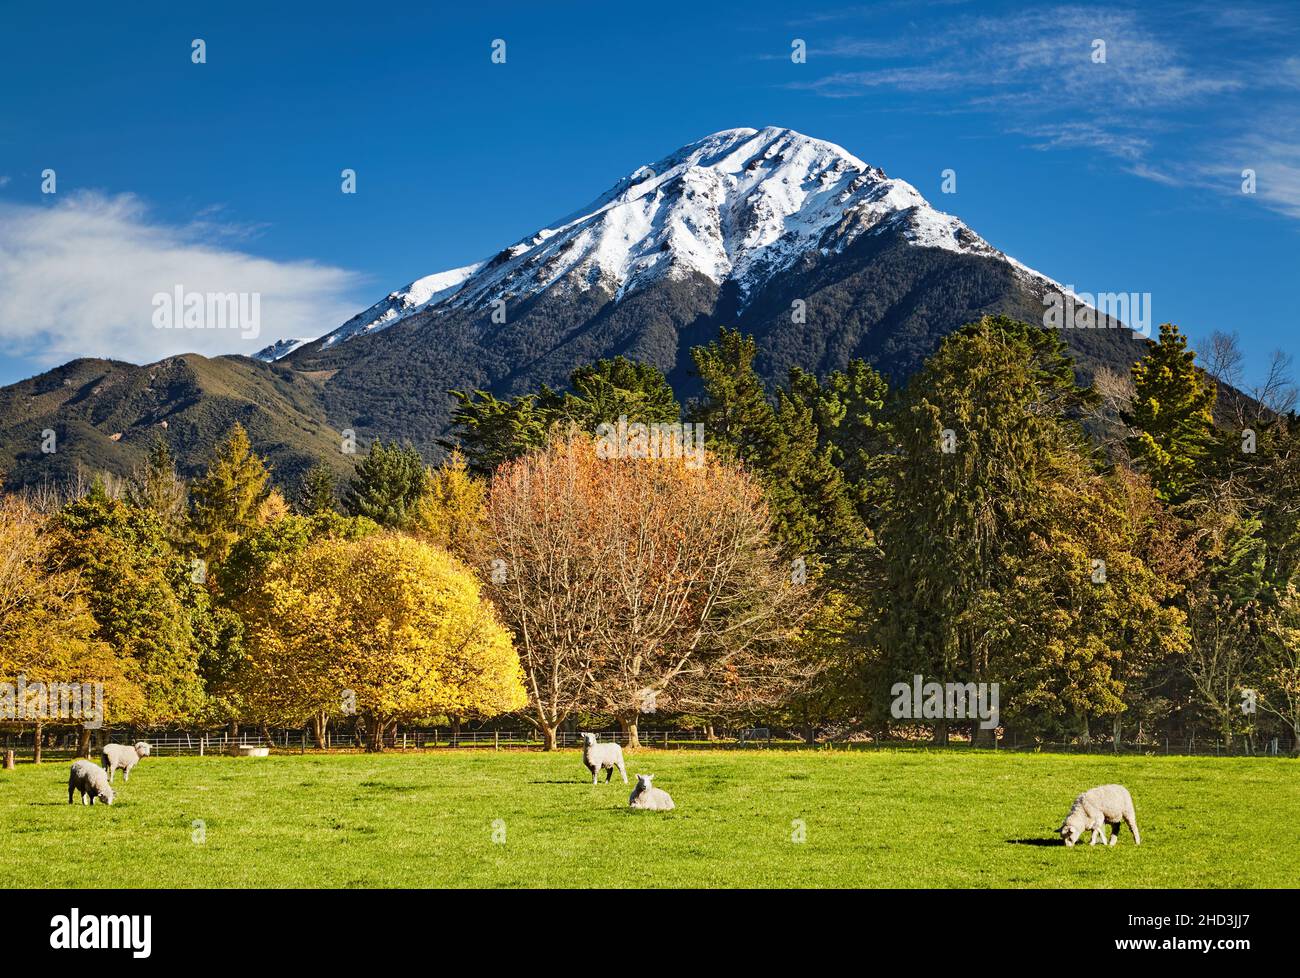 Landscape with snowy mountain and grazing sheep, New Zealand Stock Photo